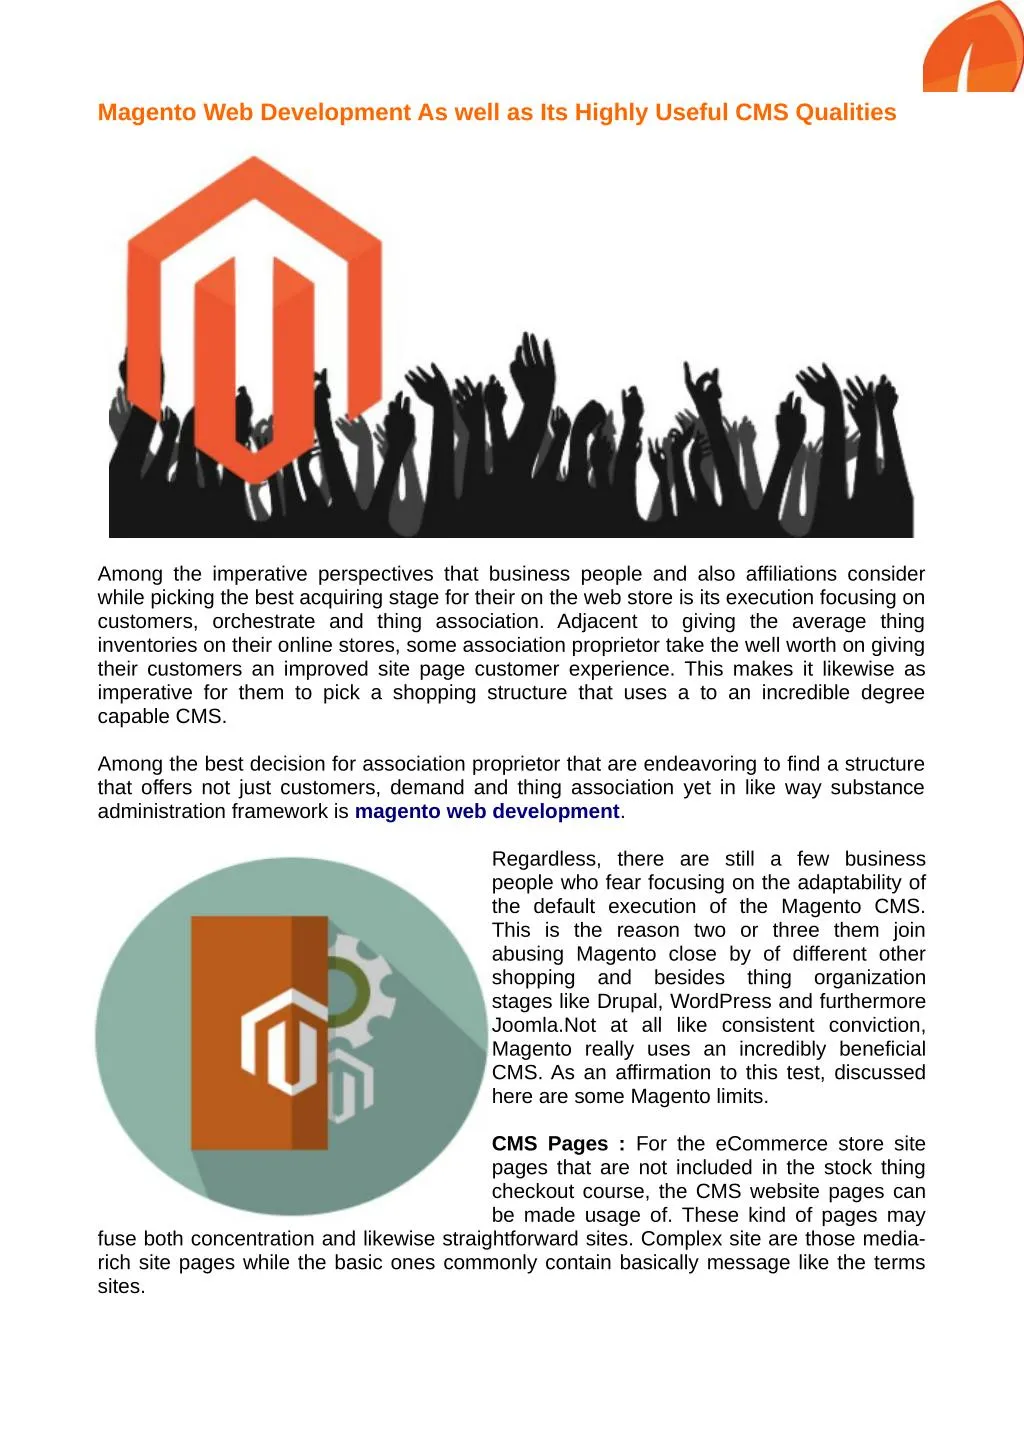 magento web development as well as its highly